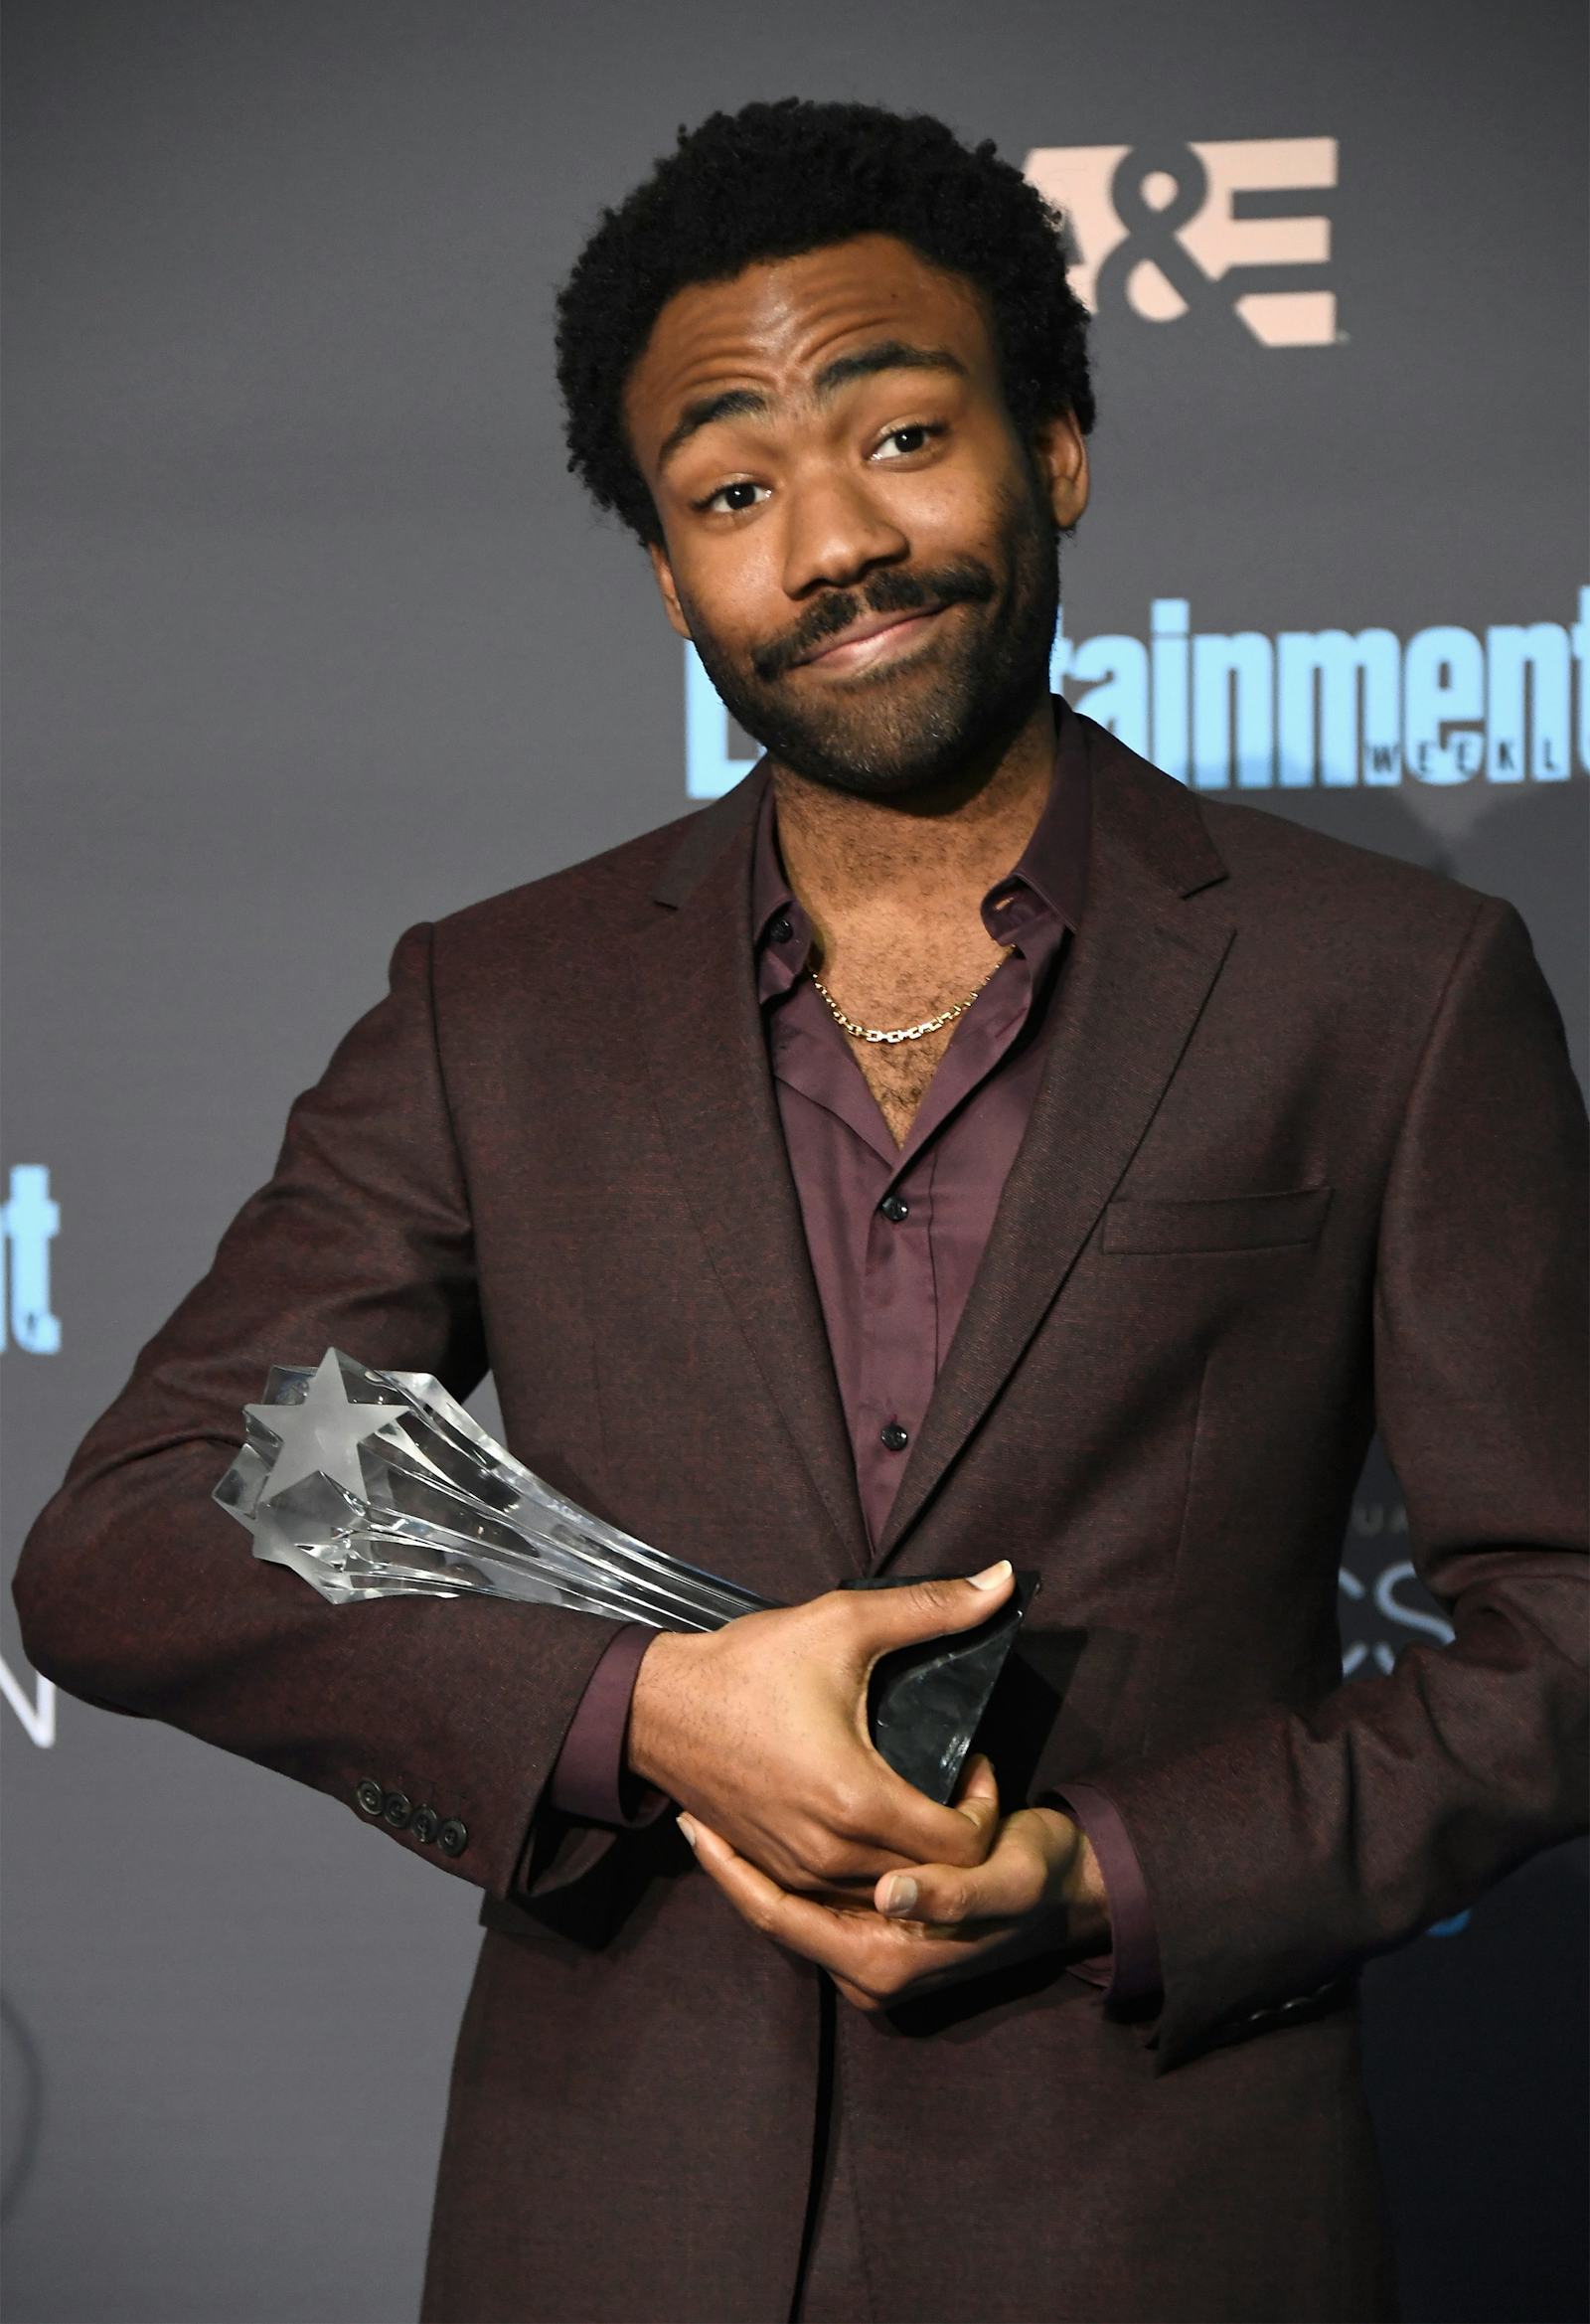 Photos of Donald Glover's Reported Baby Don't Exist Because He's A ...